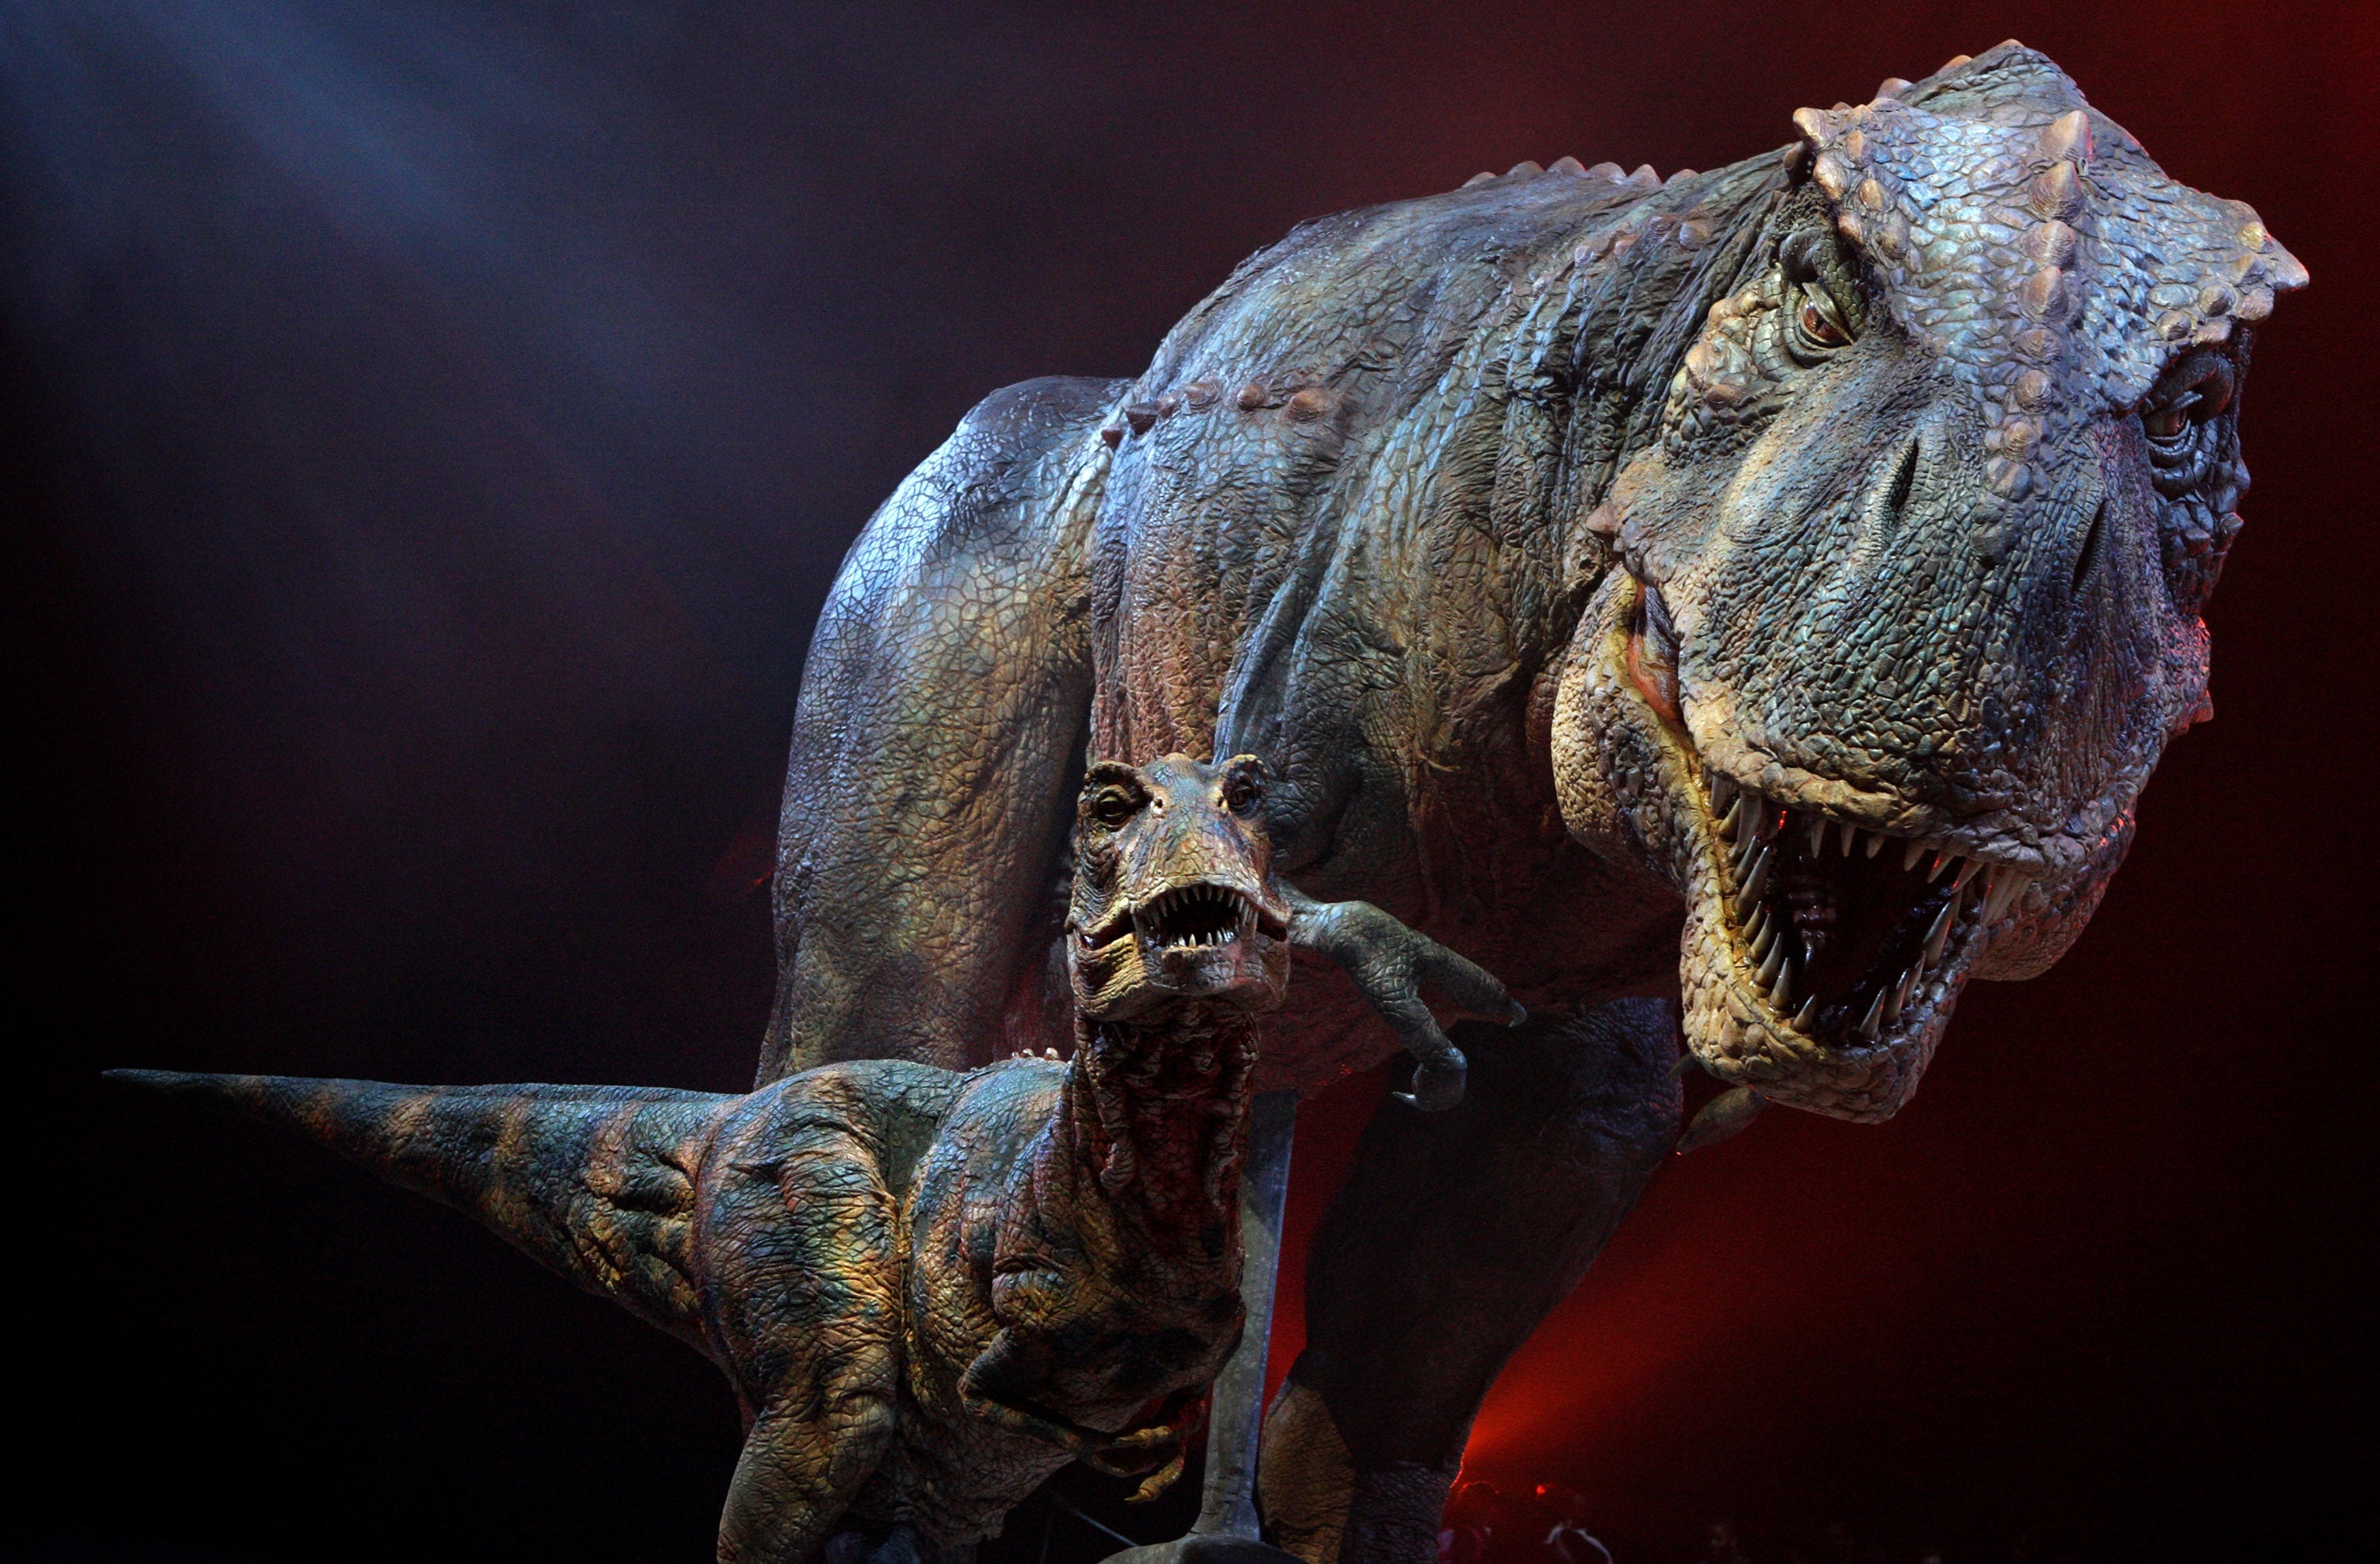 An adult and baby Tyrannosaurs Rex robotic dinosaurs perform in the O2 arena as part of the ‘Walking With Dinosaurs’ tour, based on the TV show, in 2009